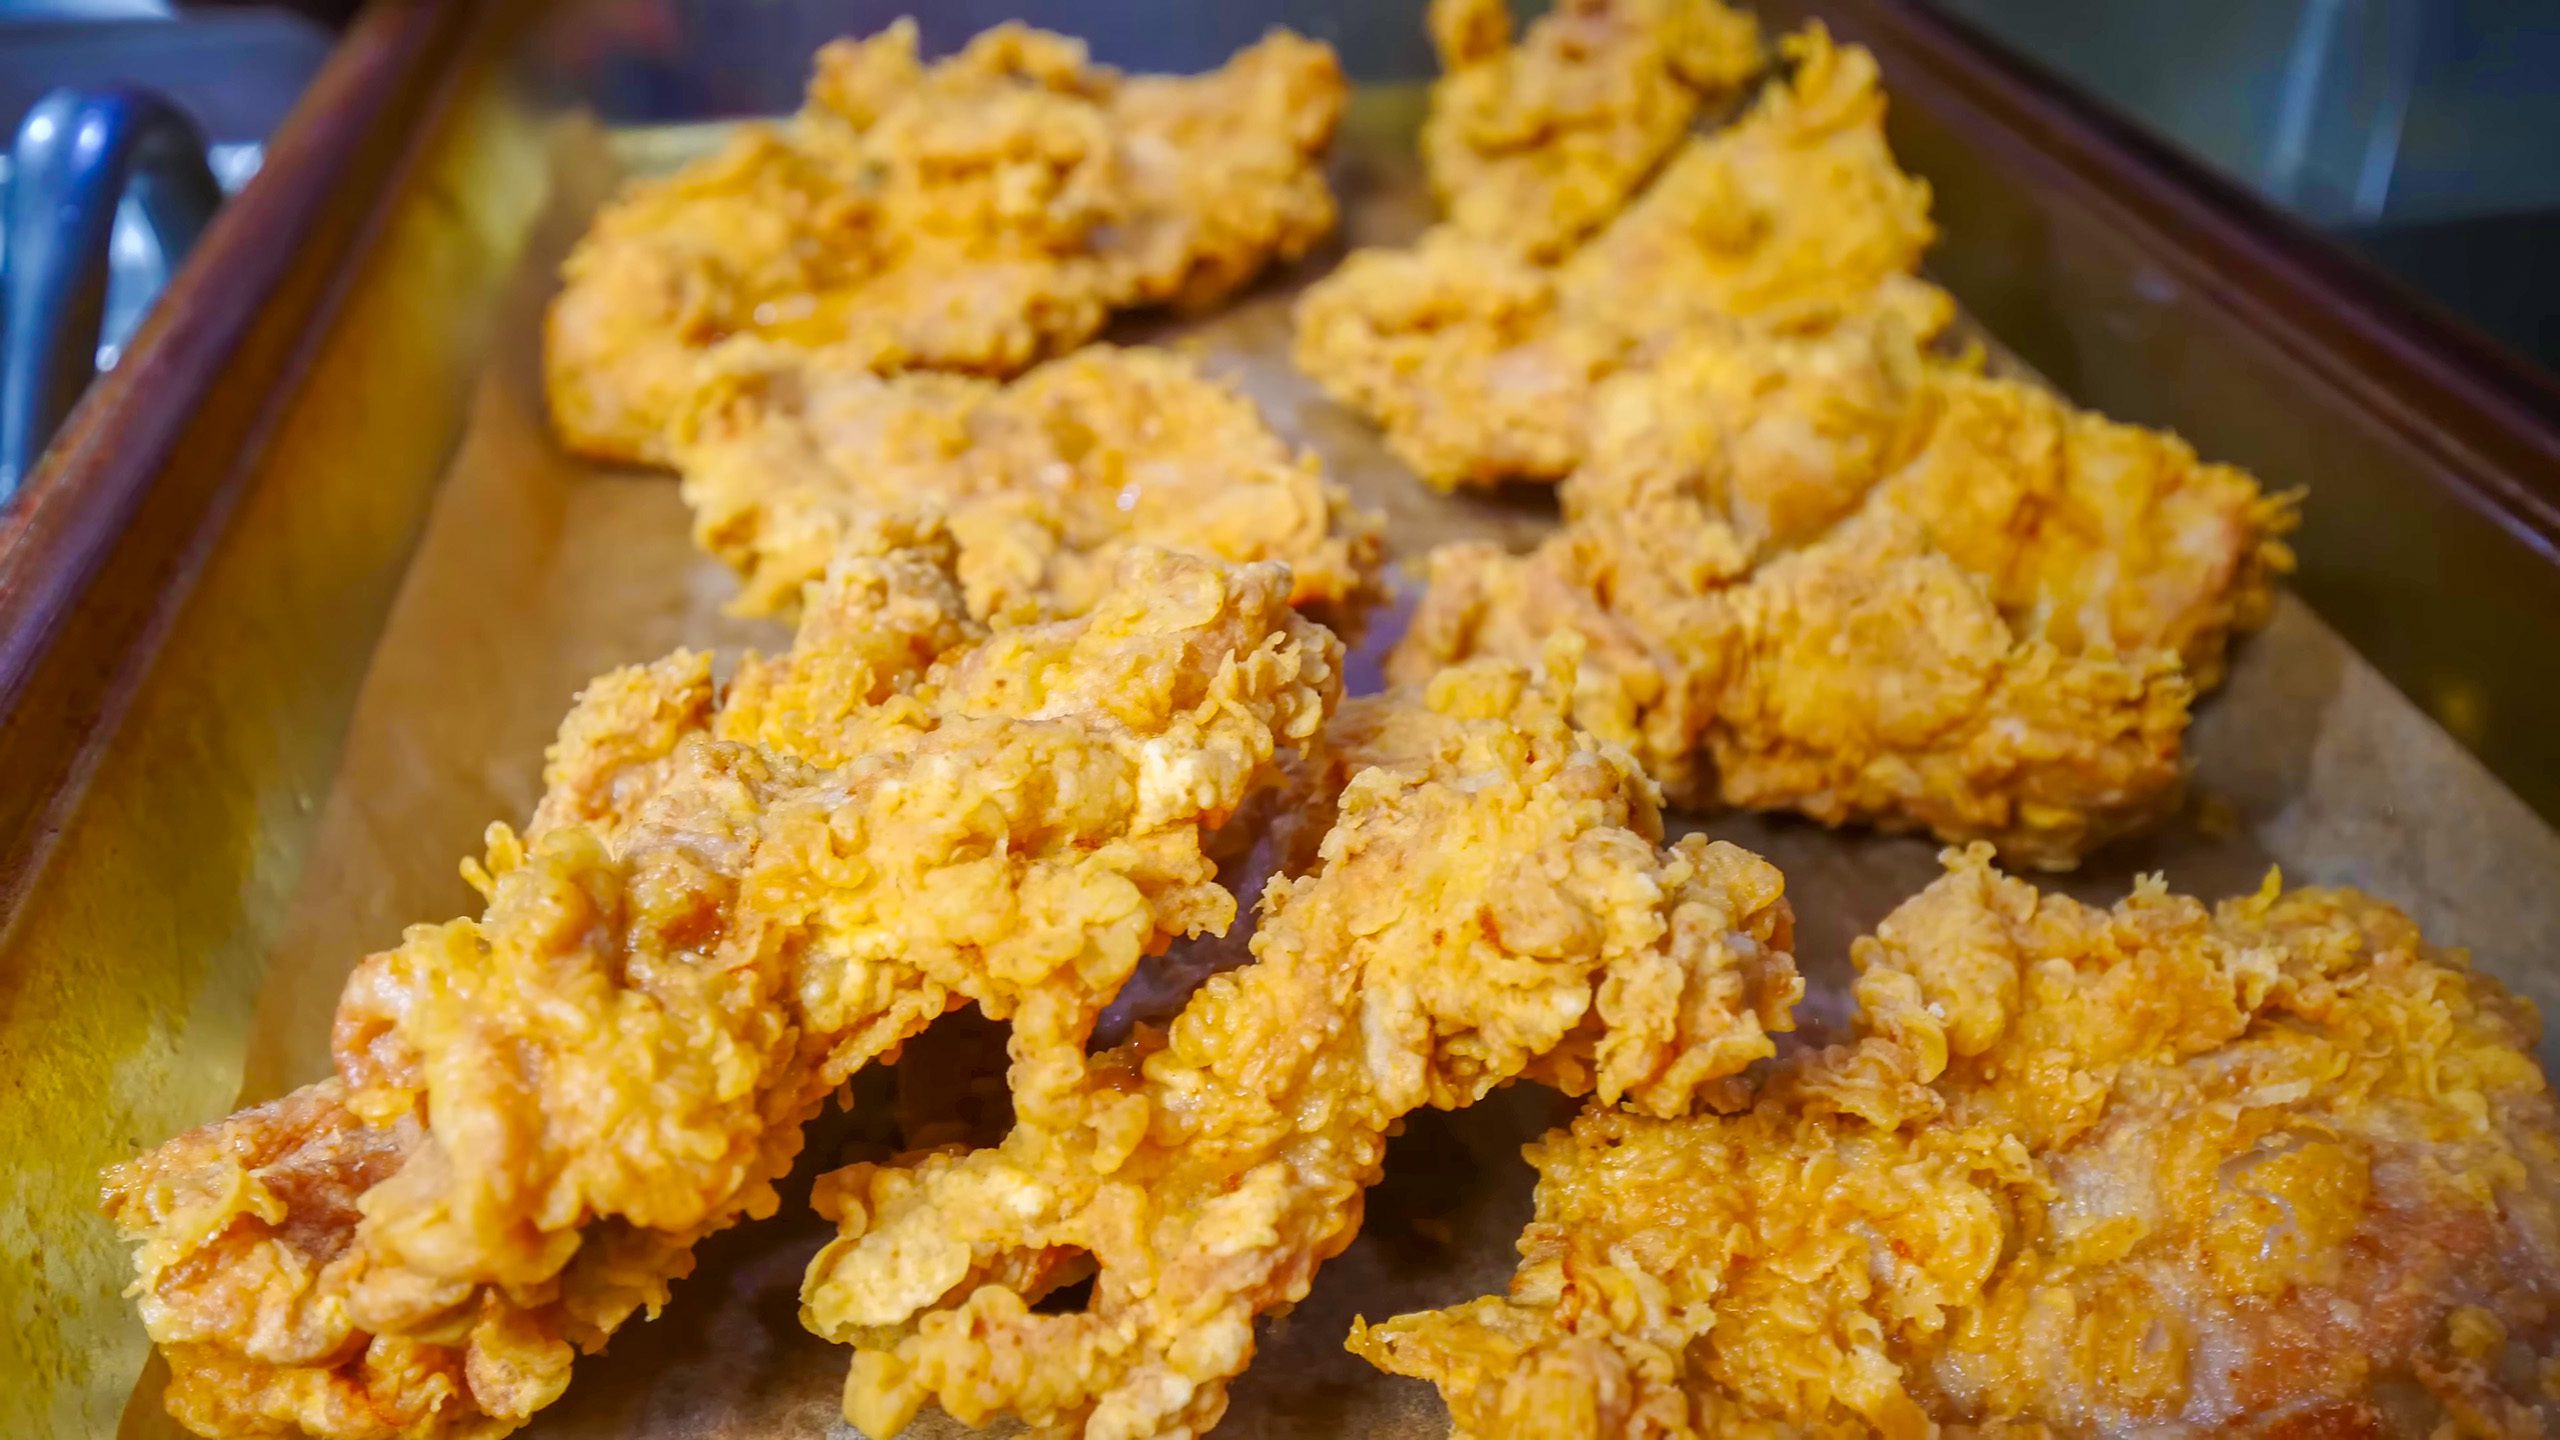 Fried chicken at Kentucky Fried Chicken in Trinidad and Tobago | Davidsbeenhere